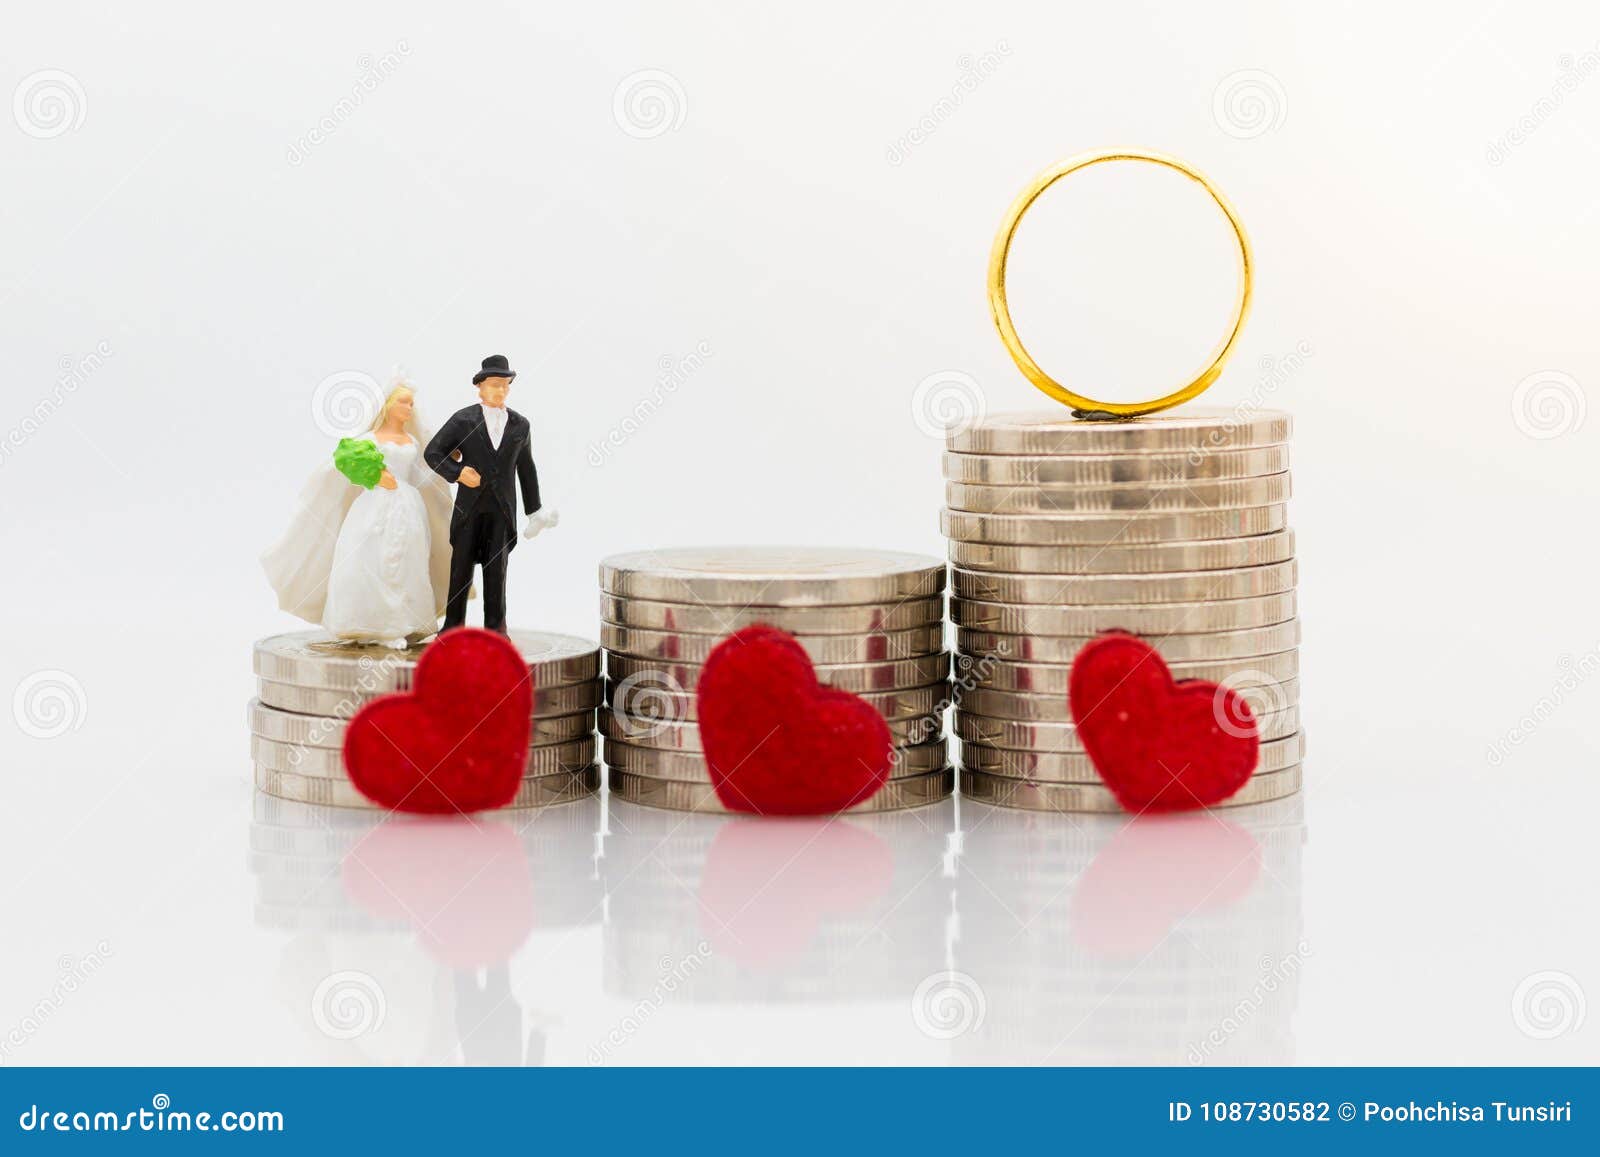 miniature people : bride and groom standing on stack of coins with wedding rings. image use for saving money for marry, accumulate